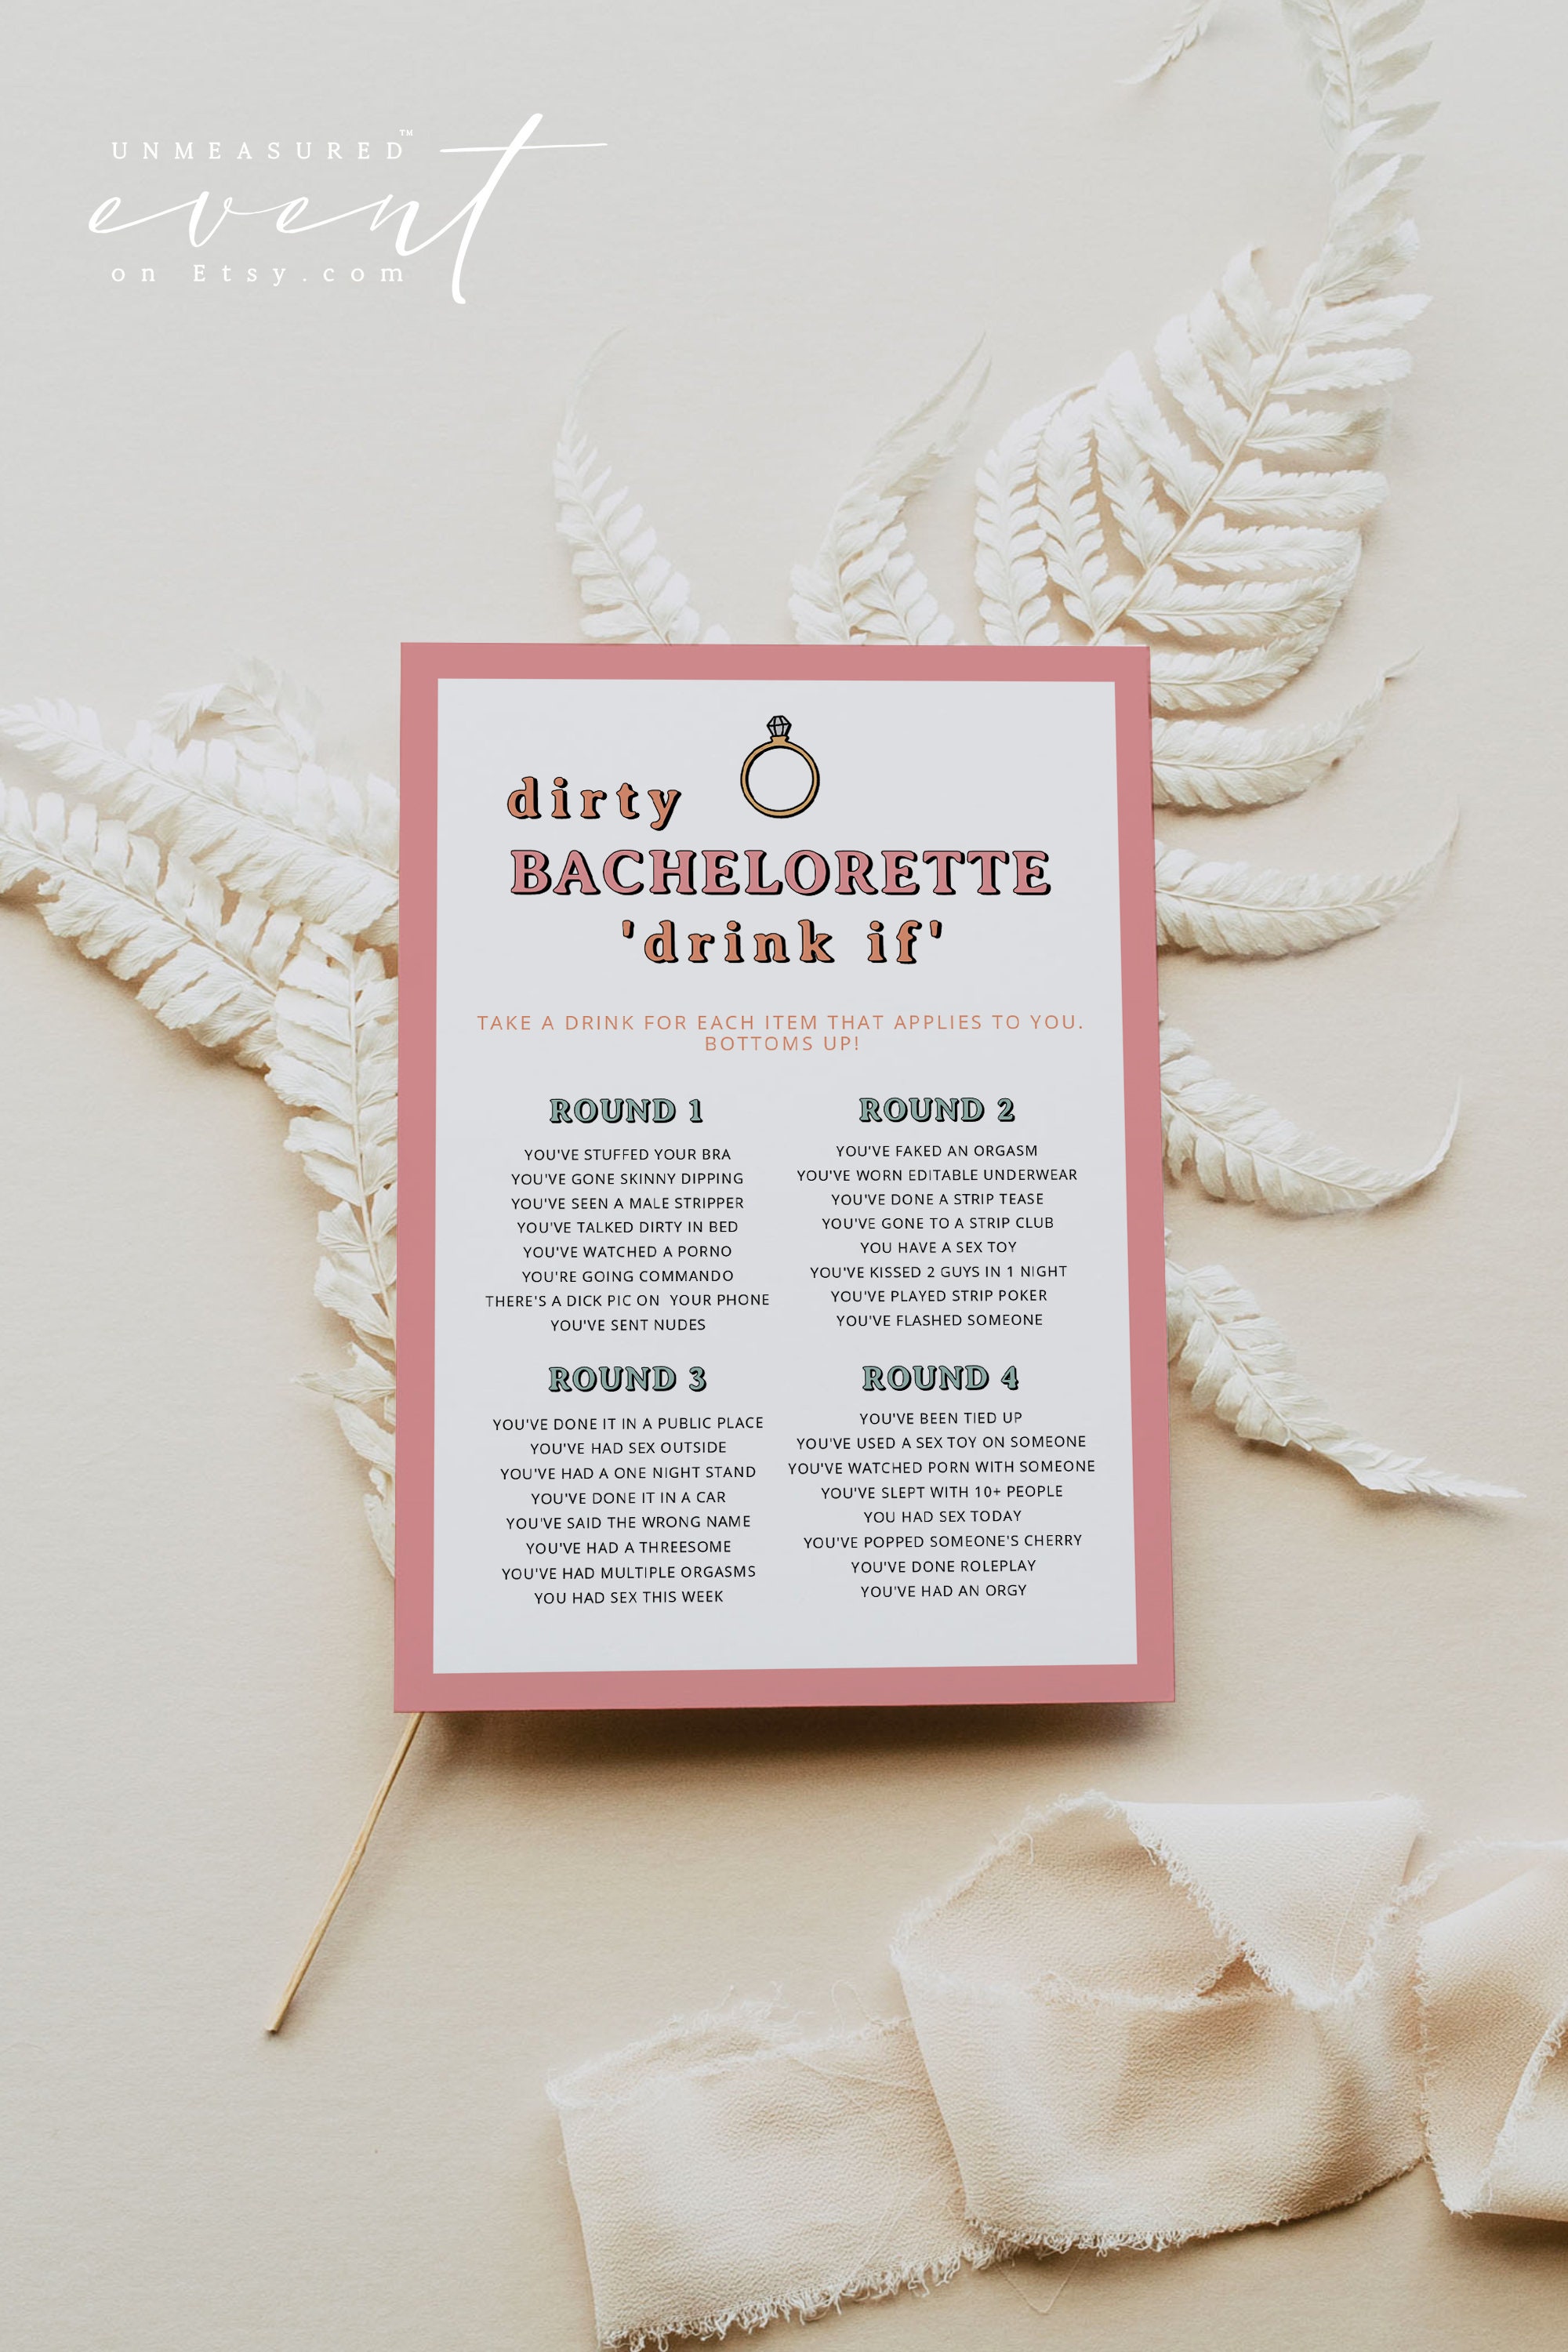 JEAN Dirty Drink If Bachelorette Game Printable Wife of picture